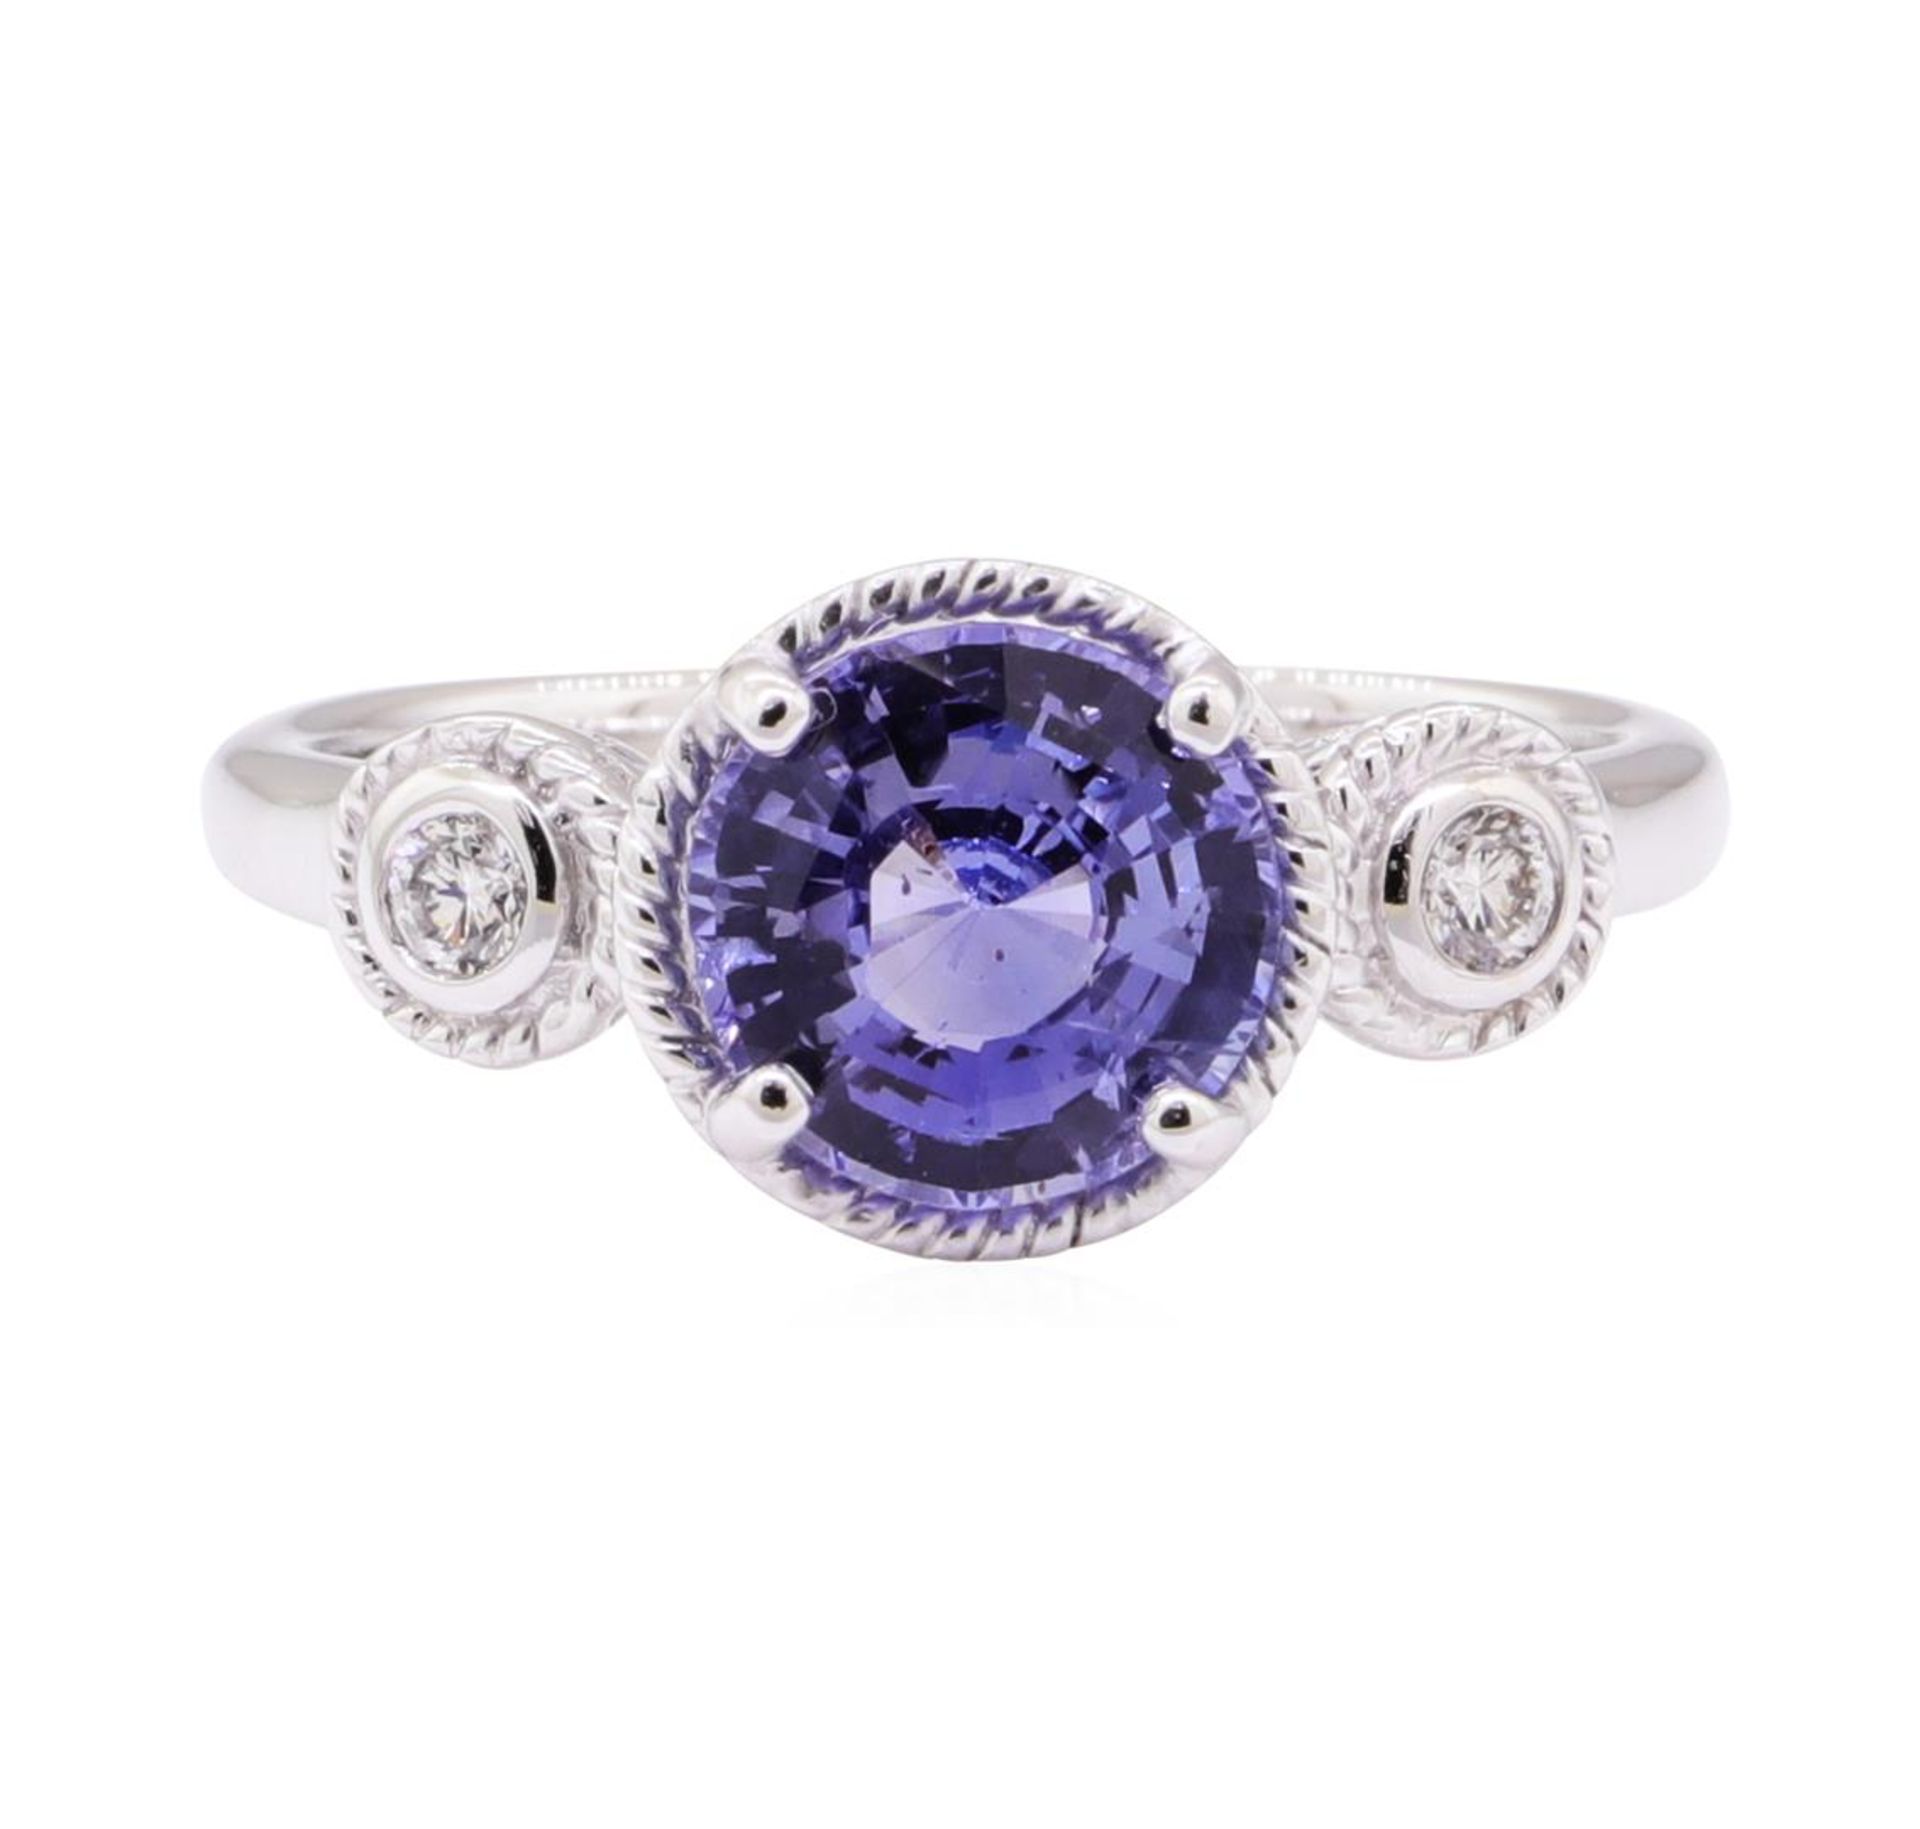 2.08ctw Blue Sapphire and Diamond Ring - 14KT White Gold - Image 2 of 4